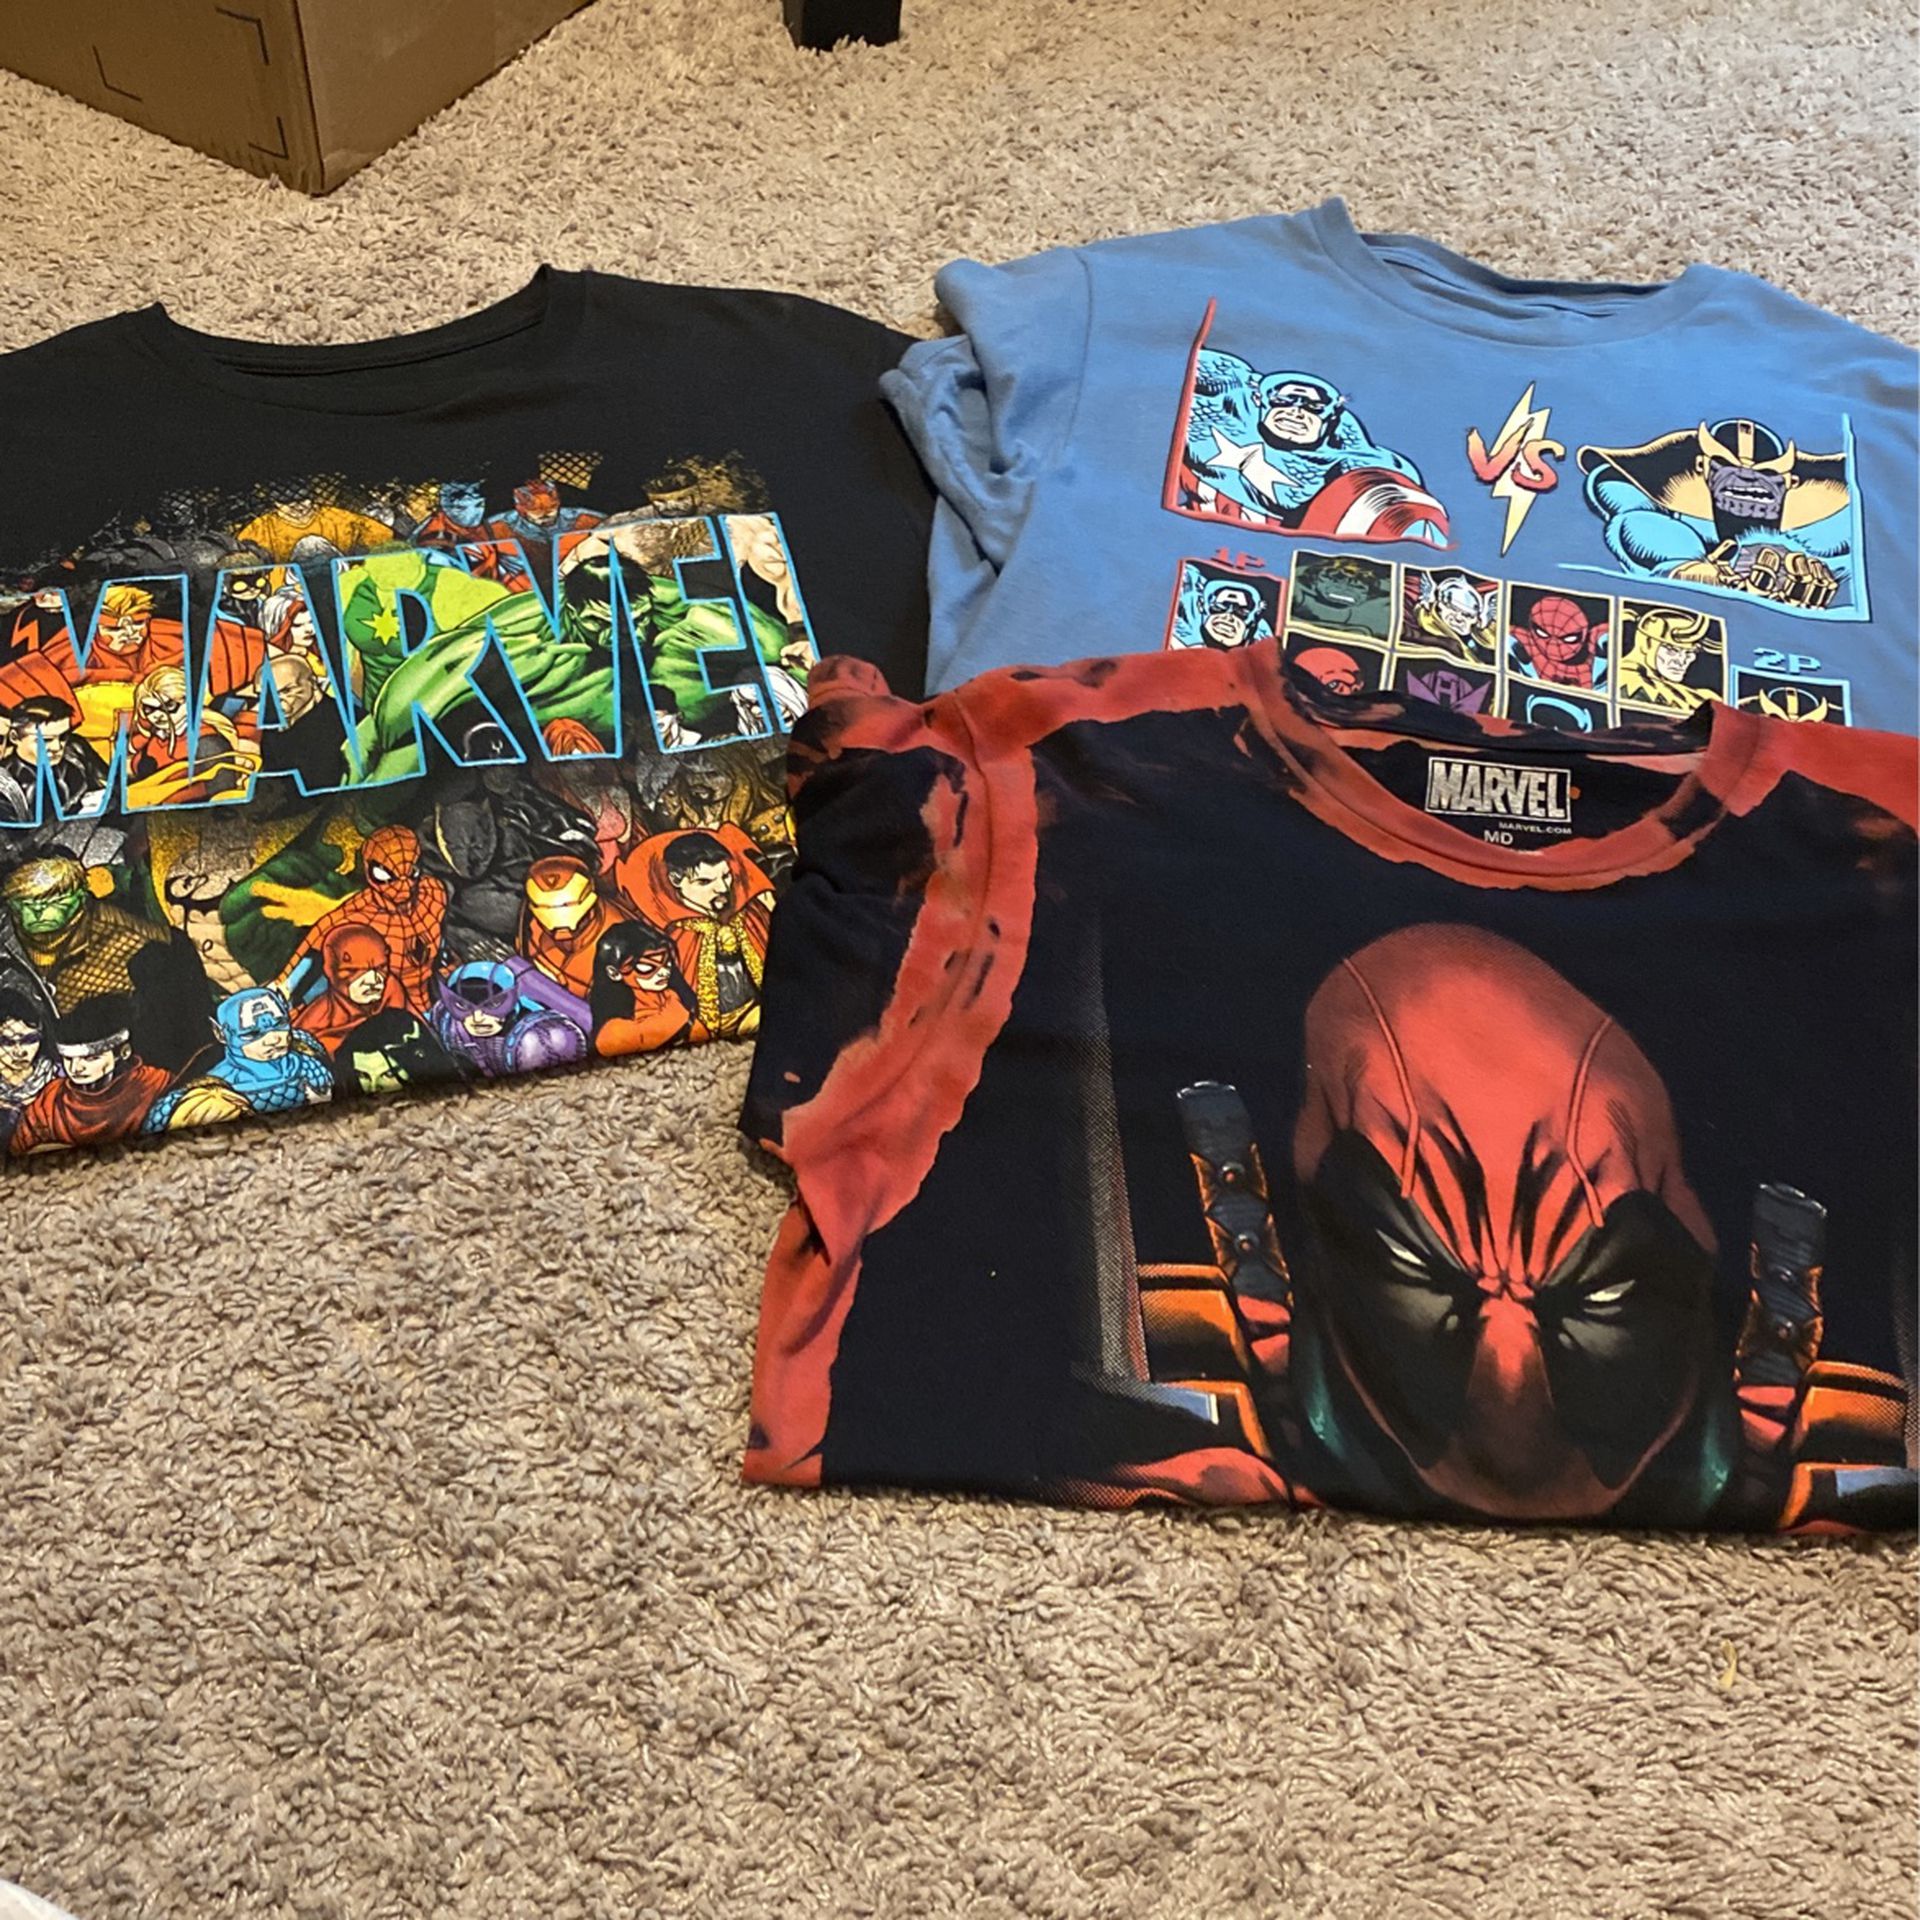 MARVEL T-Shirts (3 Shirts Included)